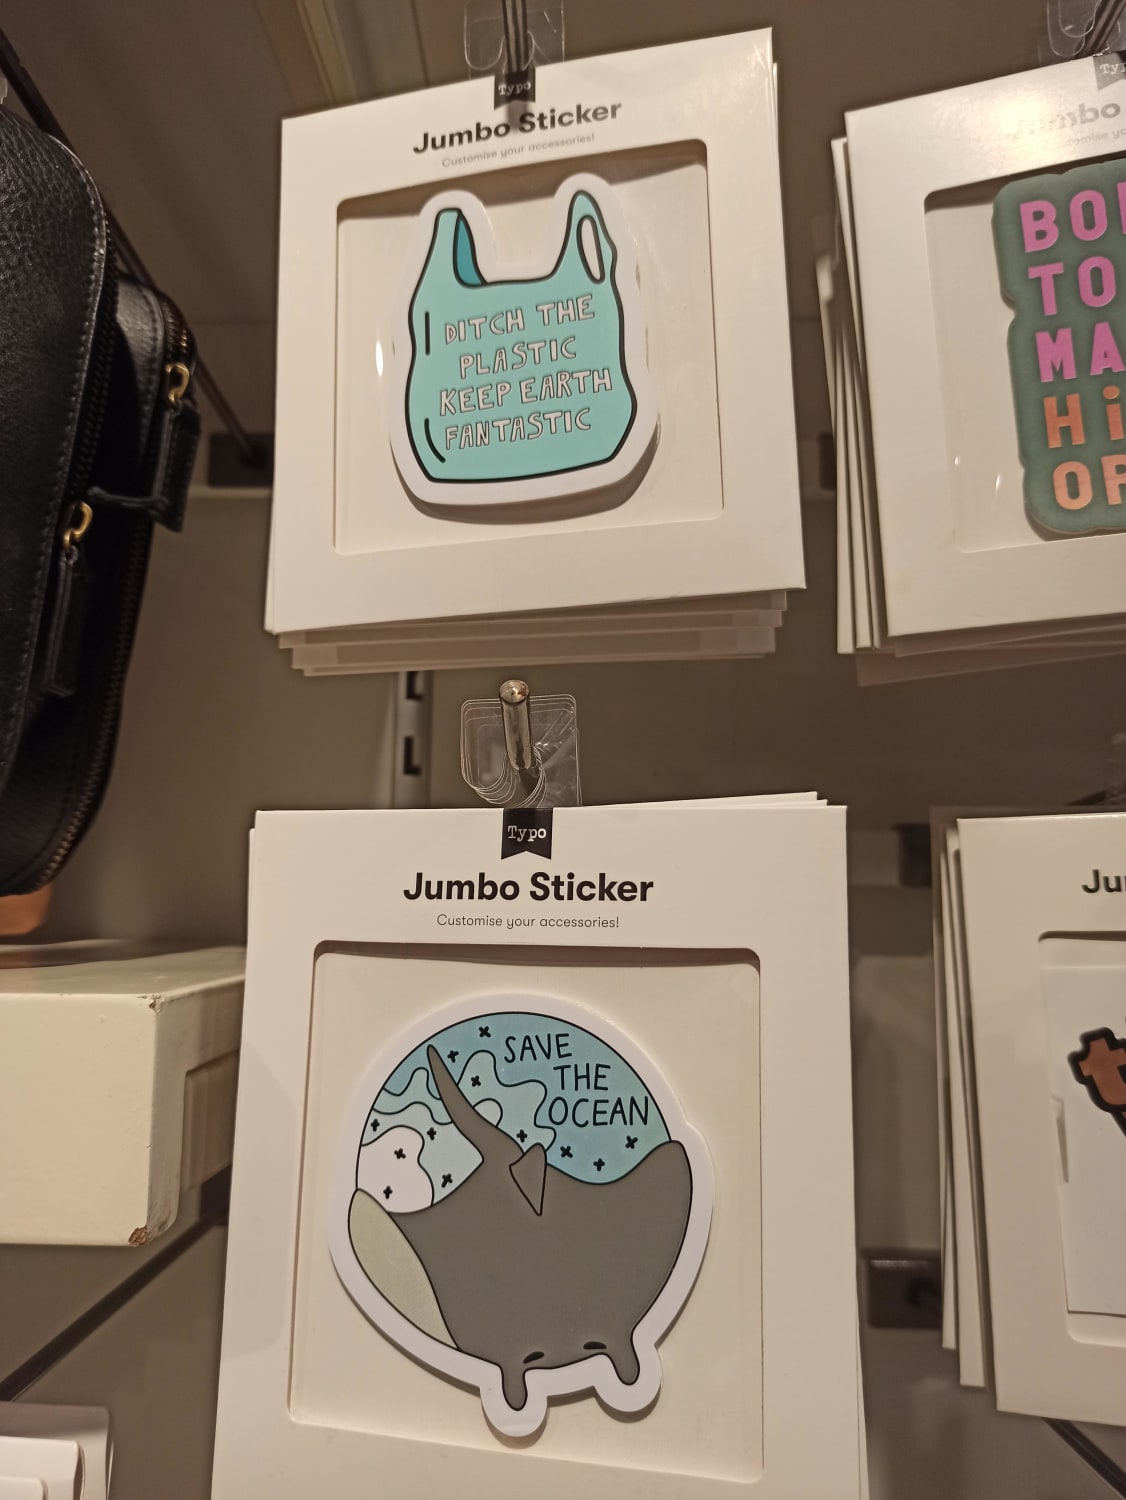 Stickers advocating against plastic waste... made of plastic and in plastic packaging